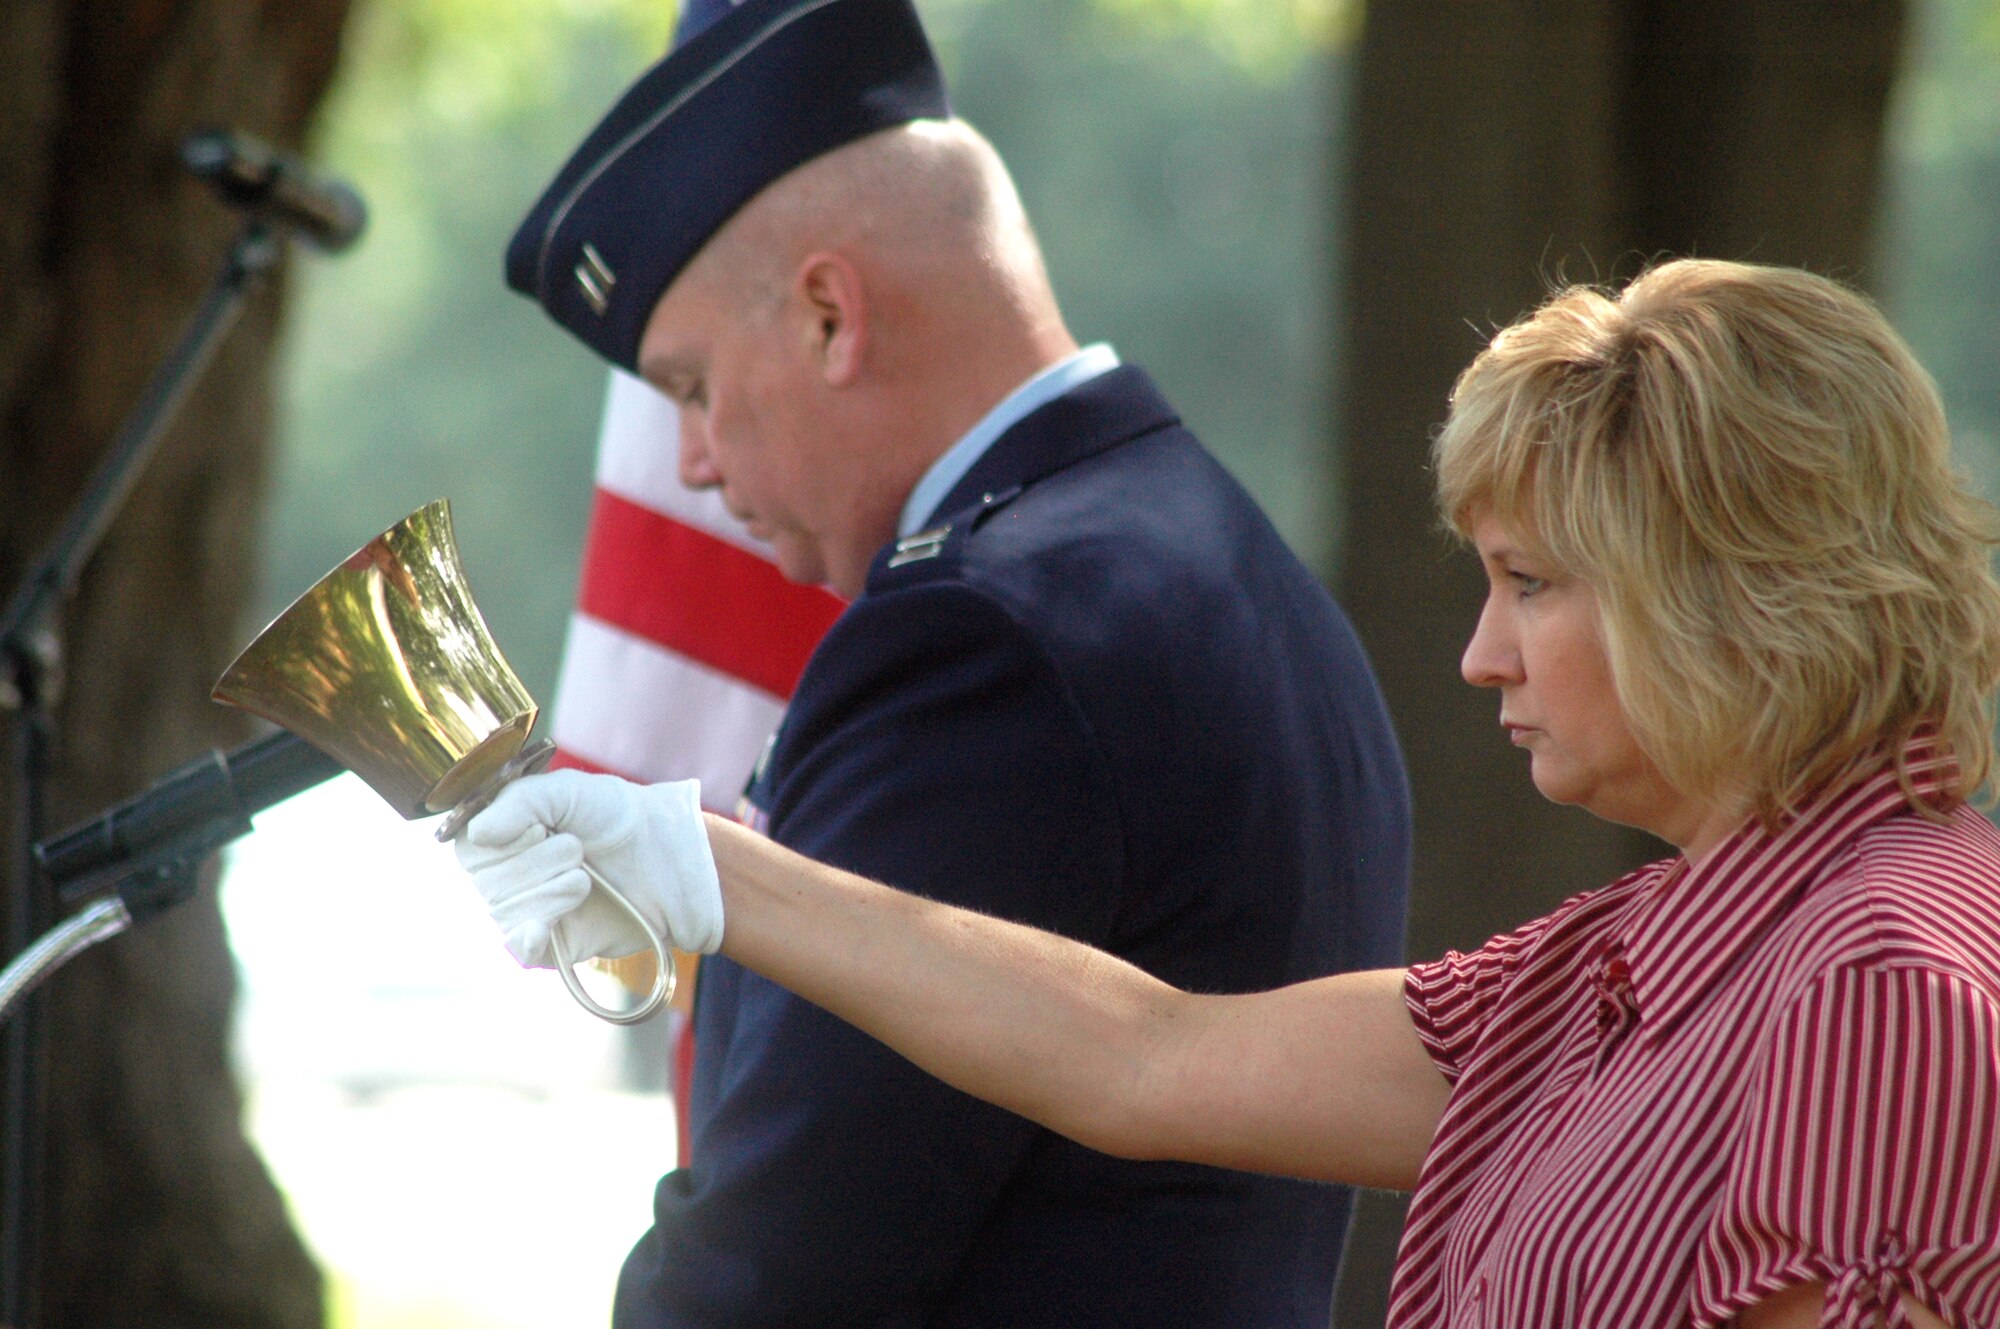 Chaplain (Capt) Paul Joyner reads the names of the honorees as Ms. Margaret Scheer tolls a bell for each one. U. S. Air Force photo by Sue Sapp